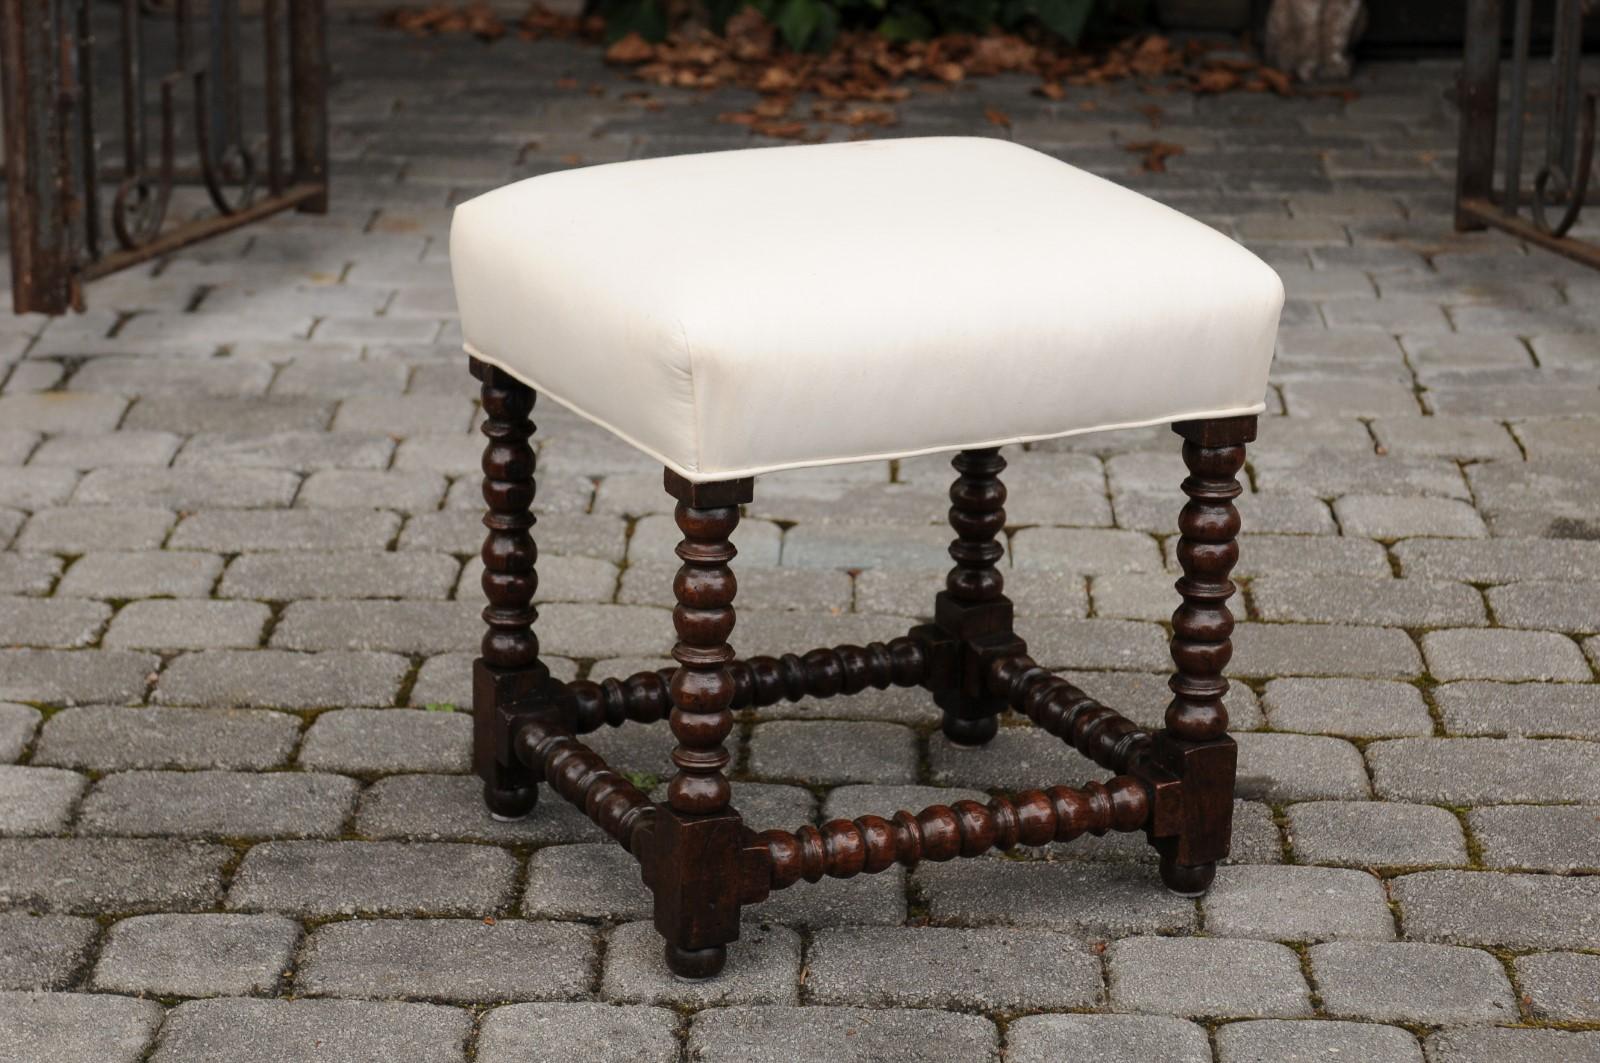 A French Louis XIII style oak stool from the early 20th century, with bobbin legs and new upholstery. Born in France at the turn of the century during the Belle Époque, this French stool features the stylistic characteristics of the Louis XIII era.